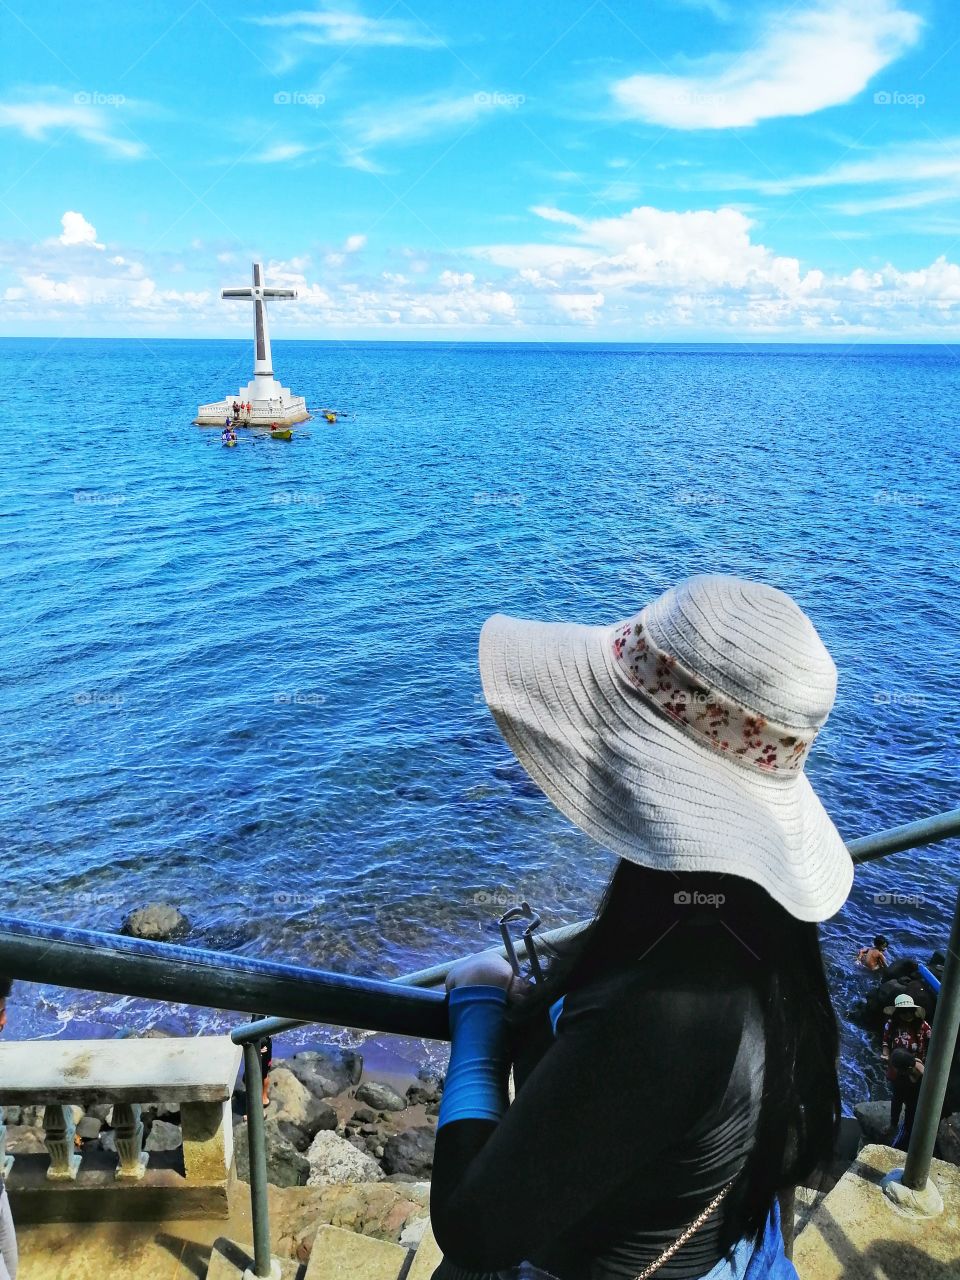 Looking at the huge cross of the Sunken Cemetery at Camiguin Island, Philippines.